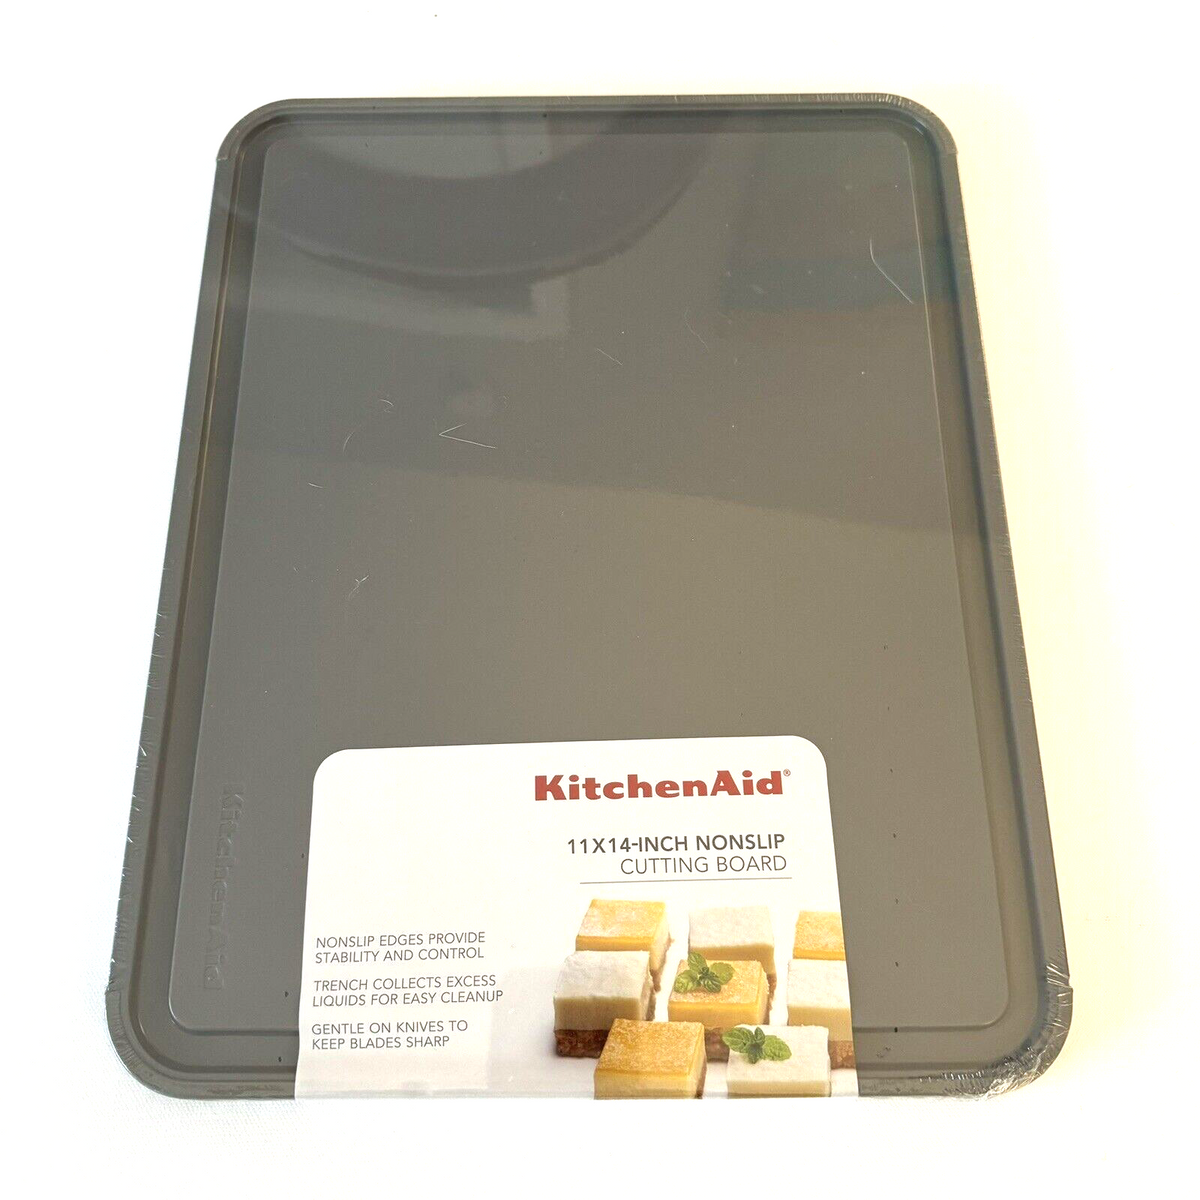 KitchenAid  Nonslip Cutting Board Solid Gray Trench - Assorted Sizes